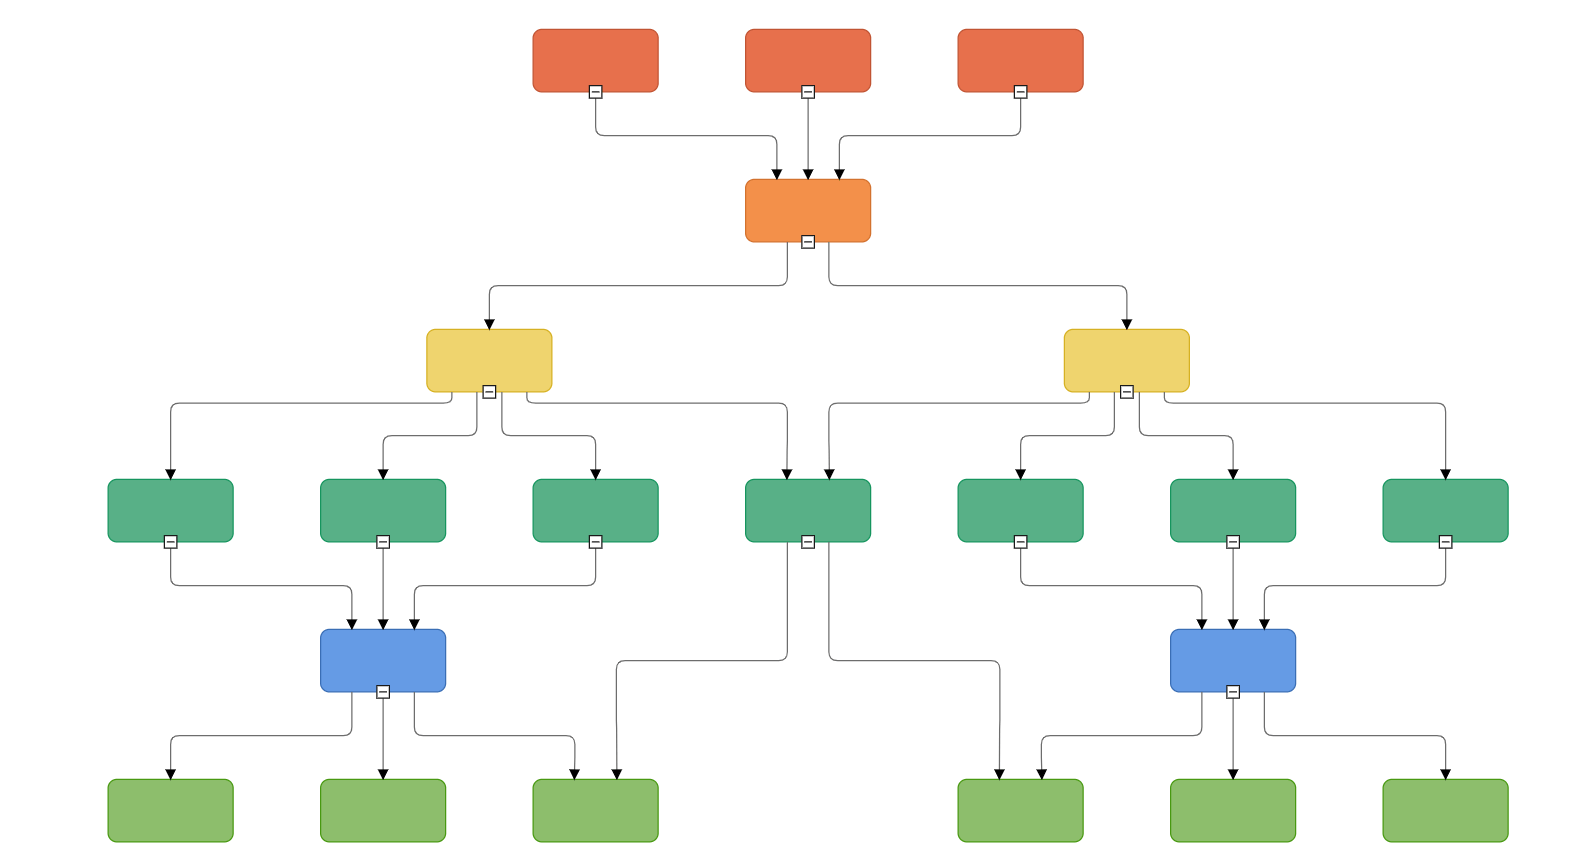 Customizing the spacing between nodes in a multiparent hierarchical tree using Angular Diagram component